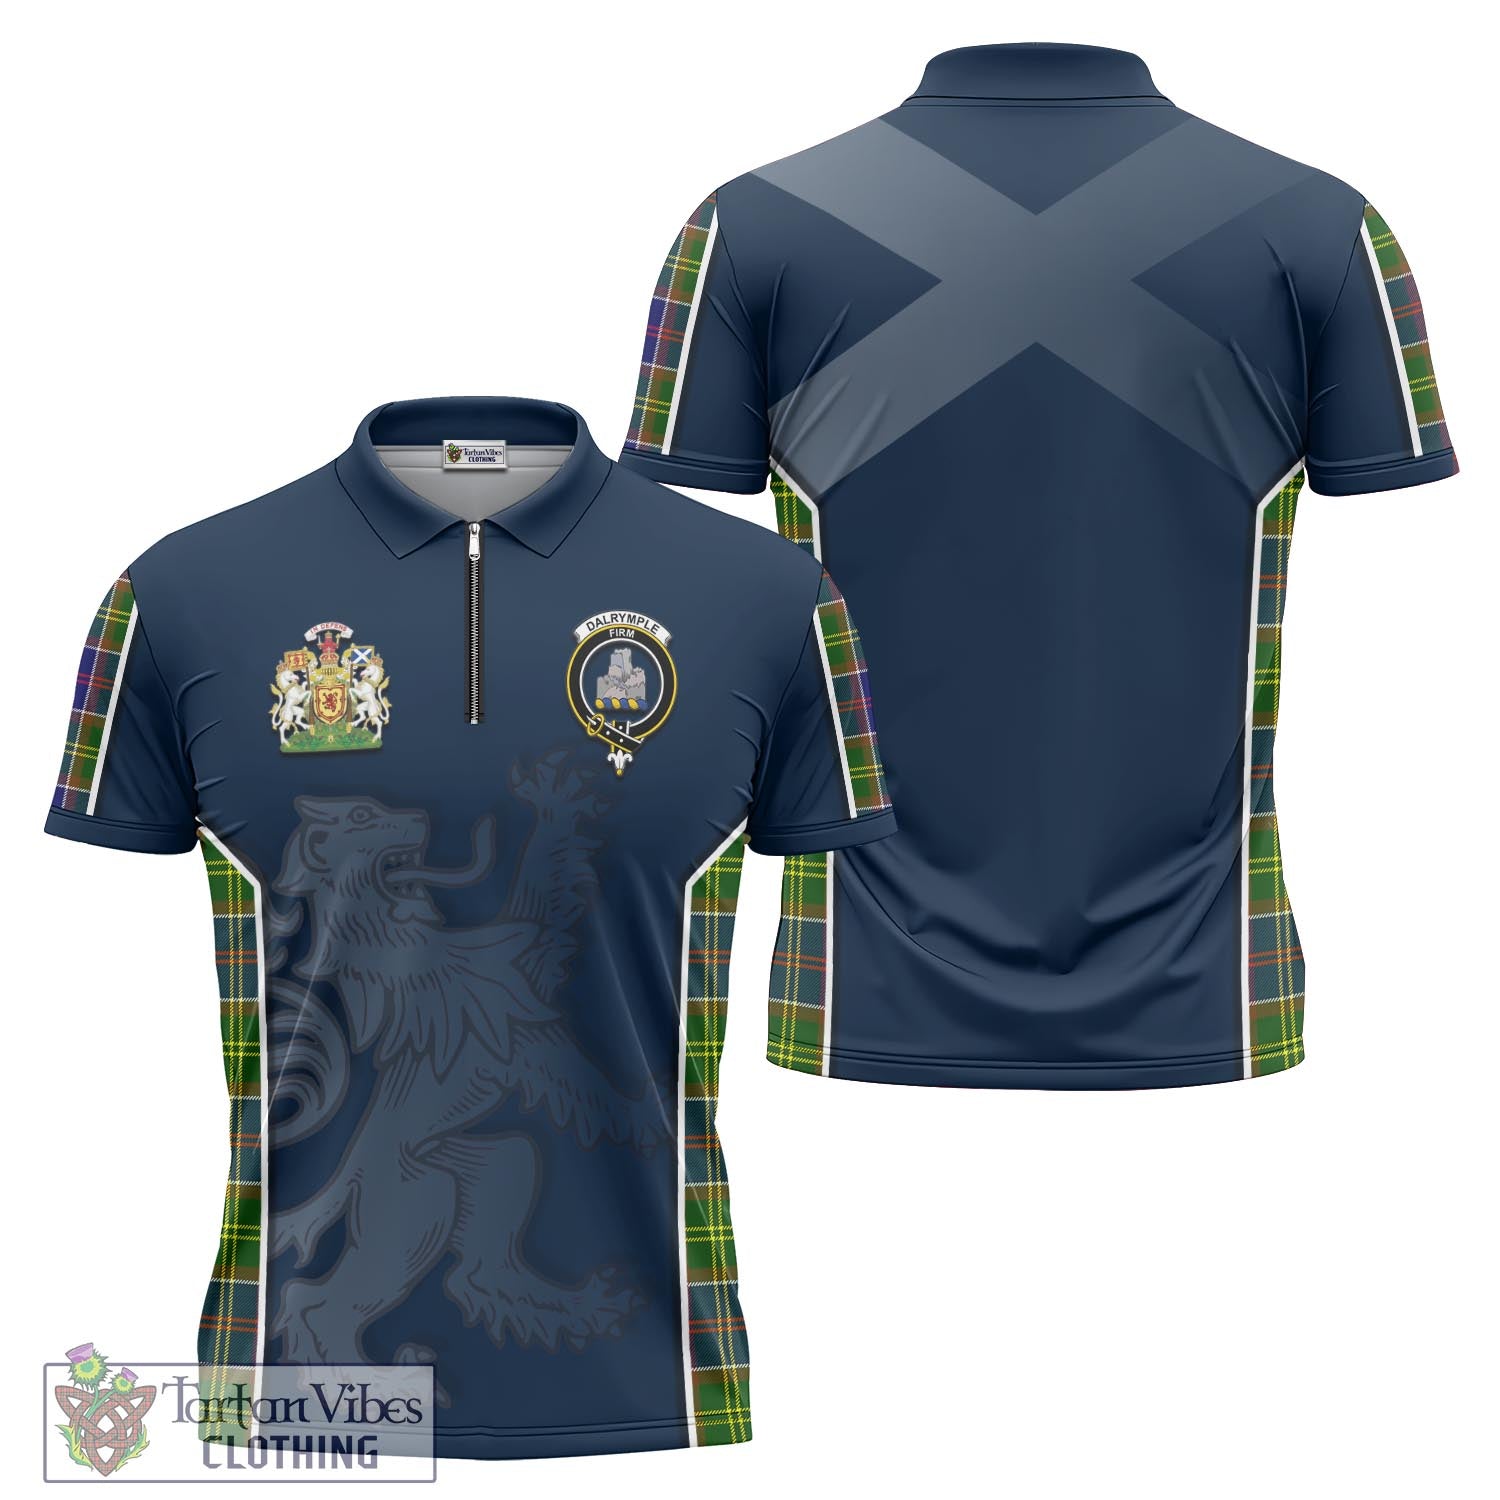 Tartan Vibes Clothing Dalrymple Tartan Zipper Polo Shirt with Family Crest and Lion Rampant Vibes Sport Style